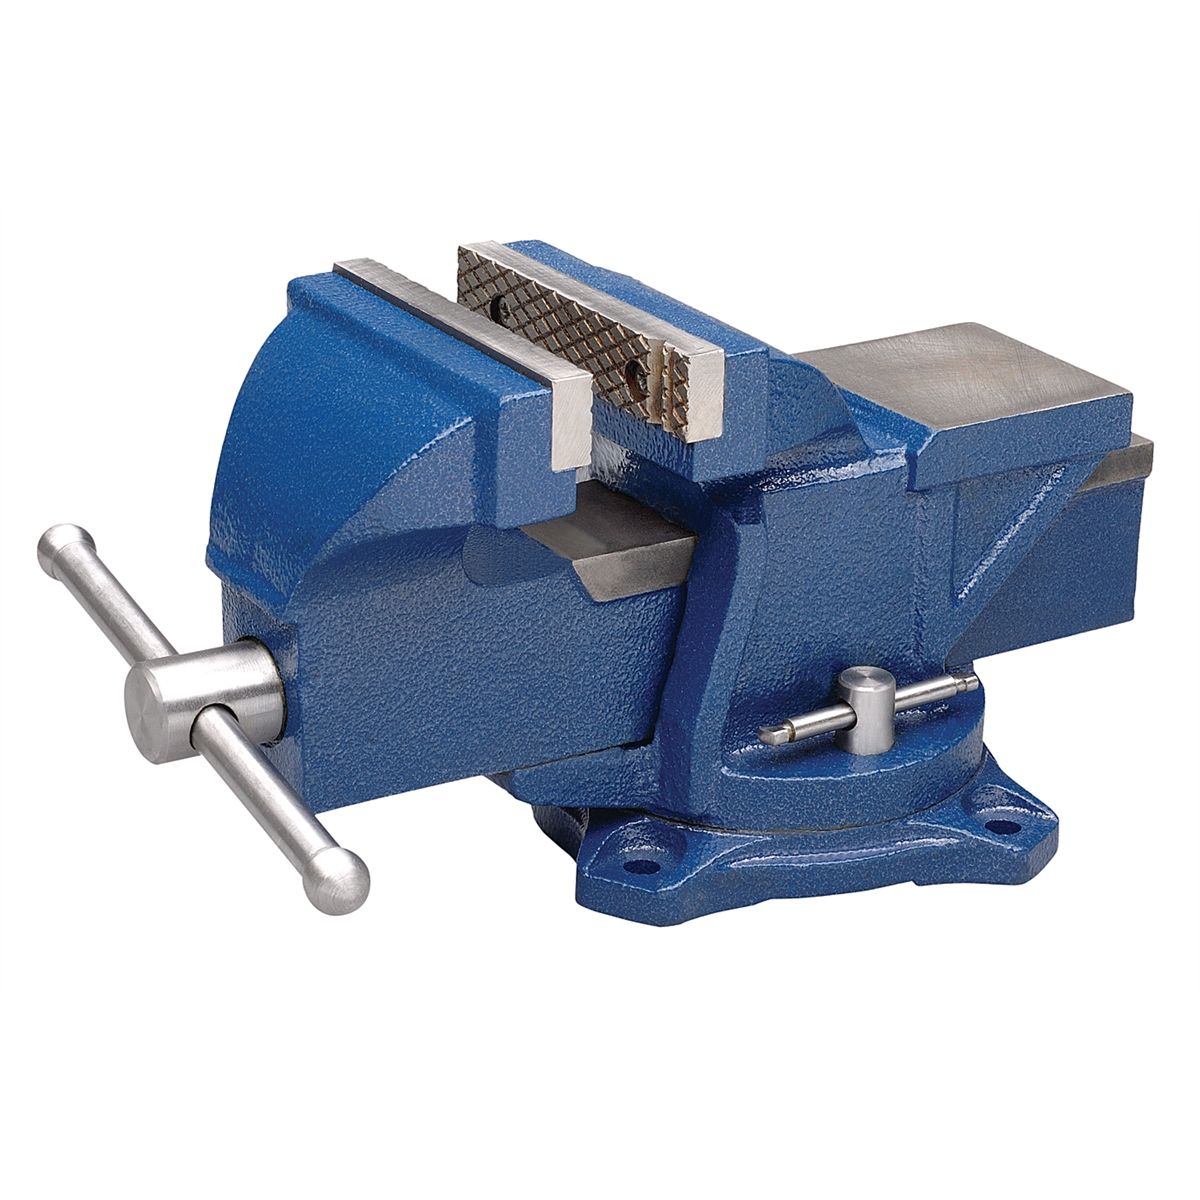 WILTON 4" Jaw Bench Vise with Swivel Base